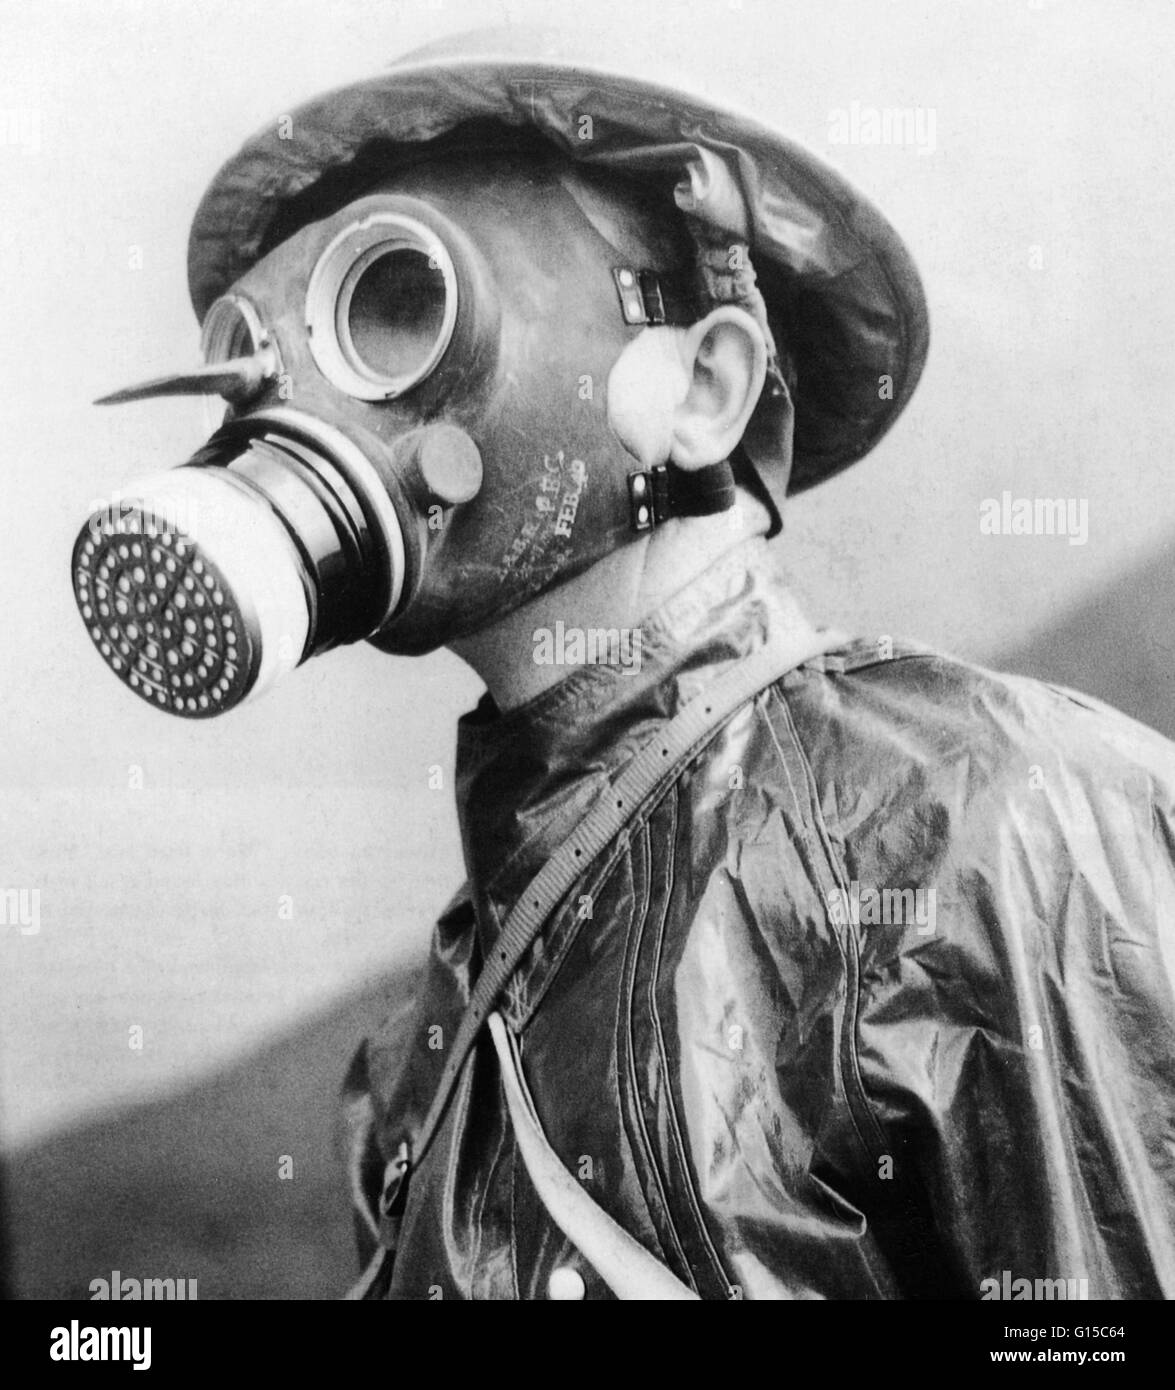 british-soldier-wearing-a-gas-mask-and-protective-suit-in-1940-during-G15C64.jpg